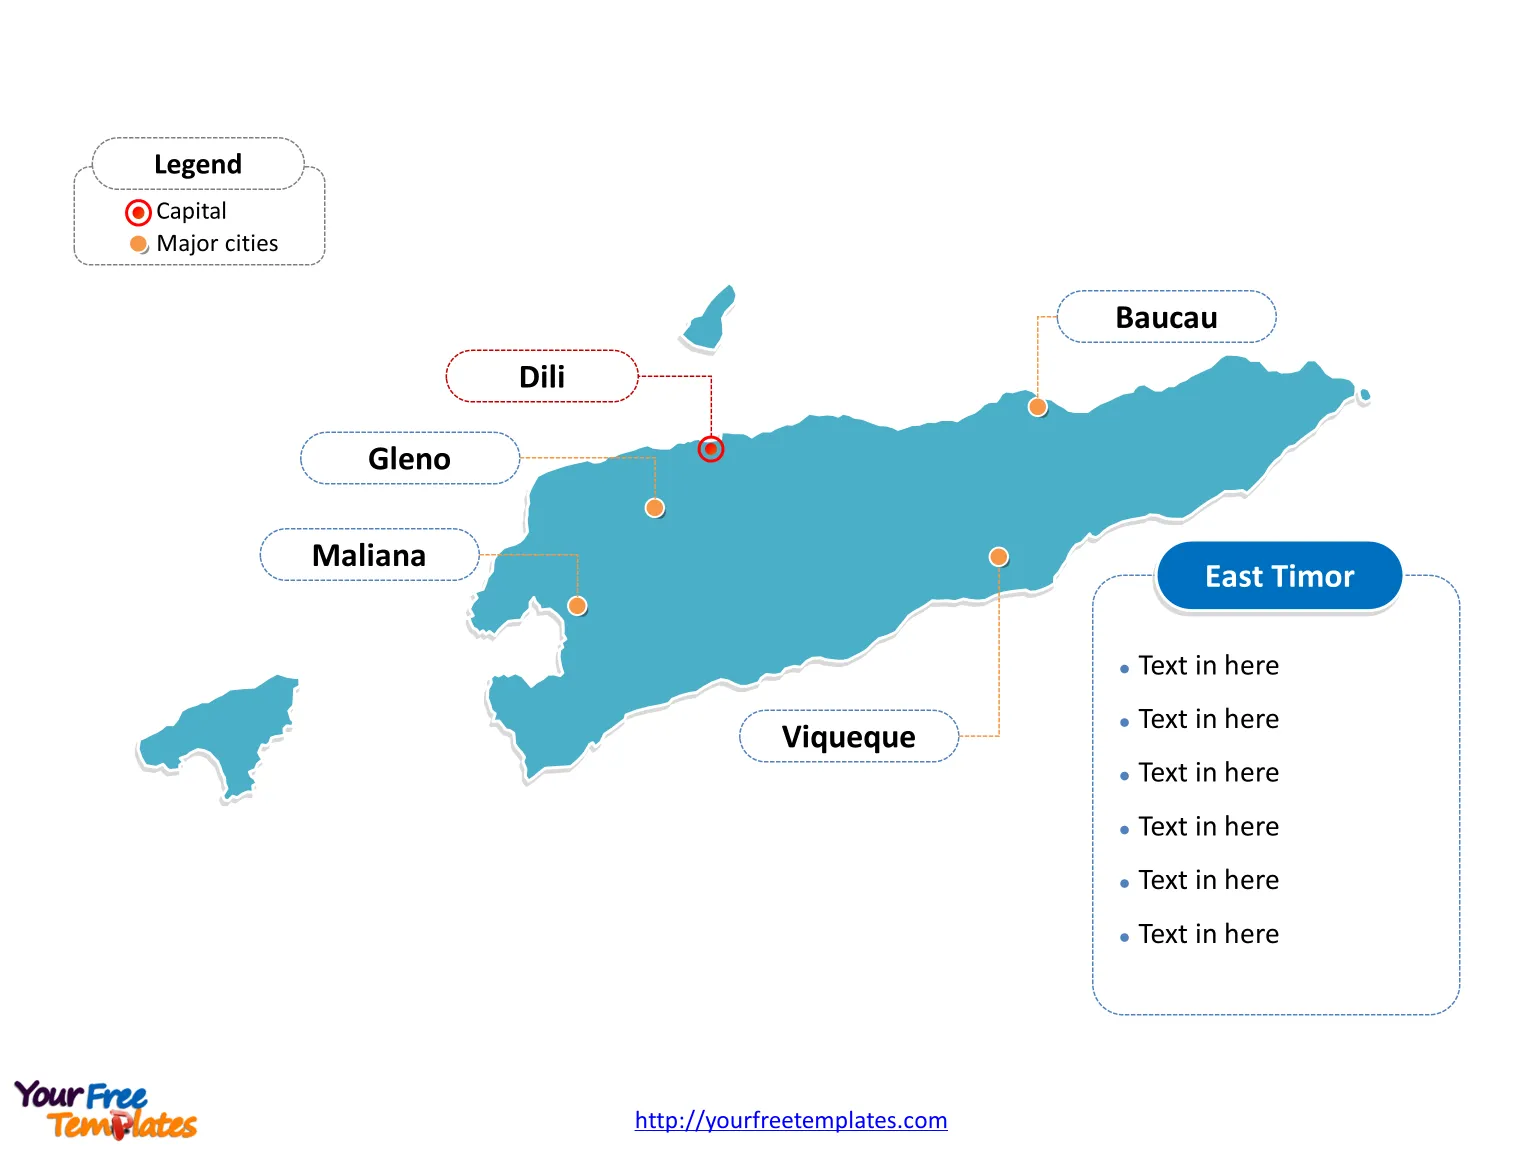 East Timor Outline map labeled with cities